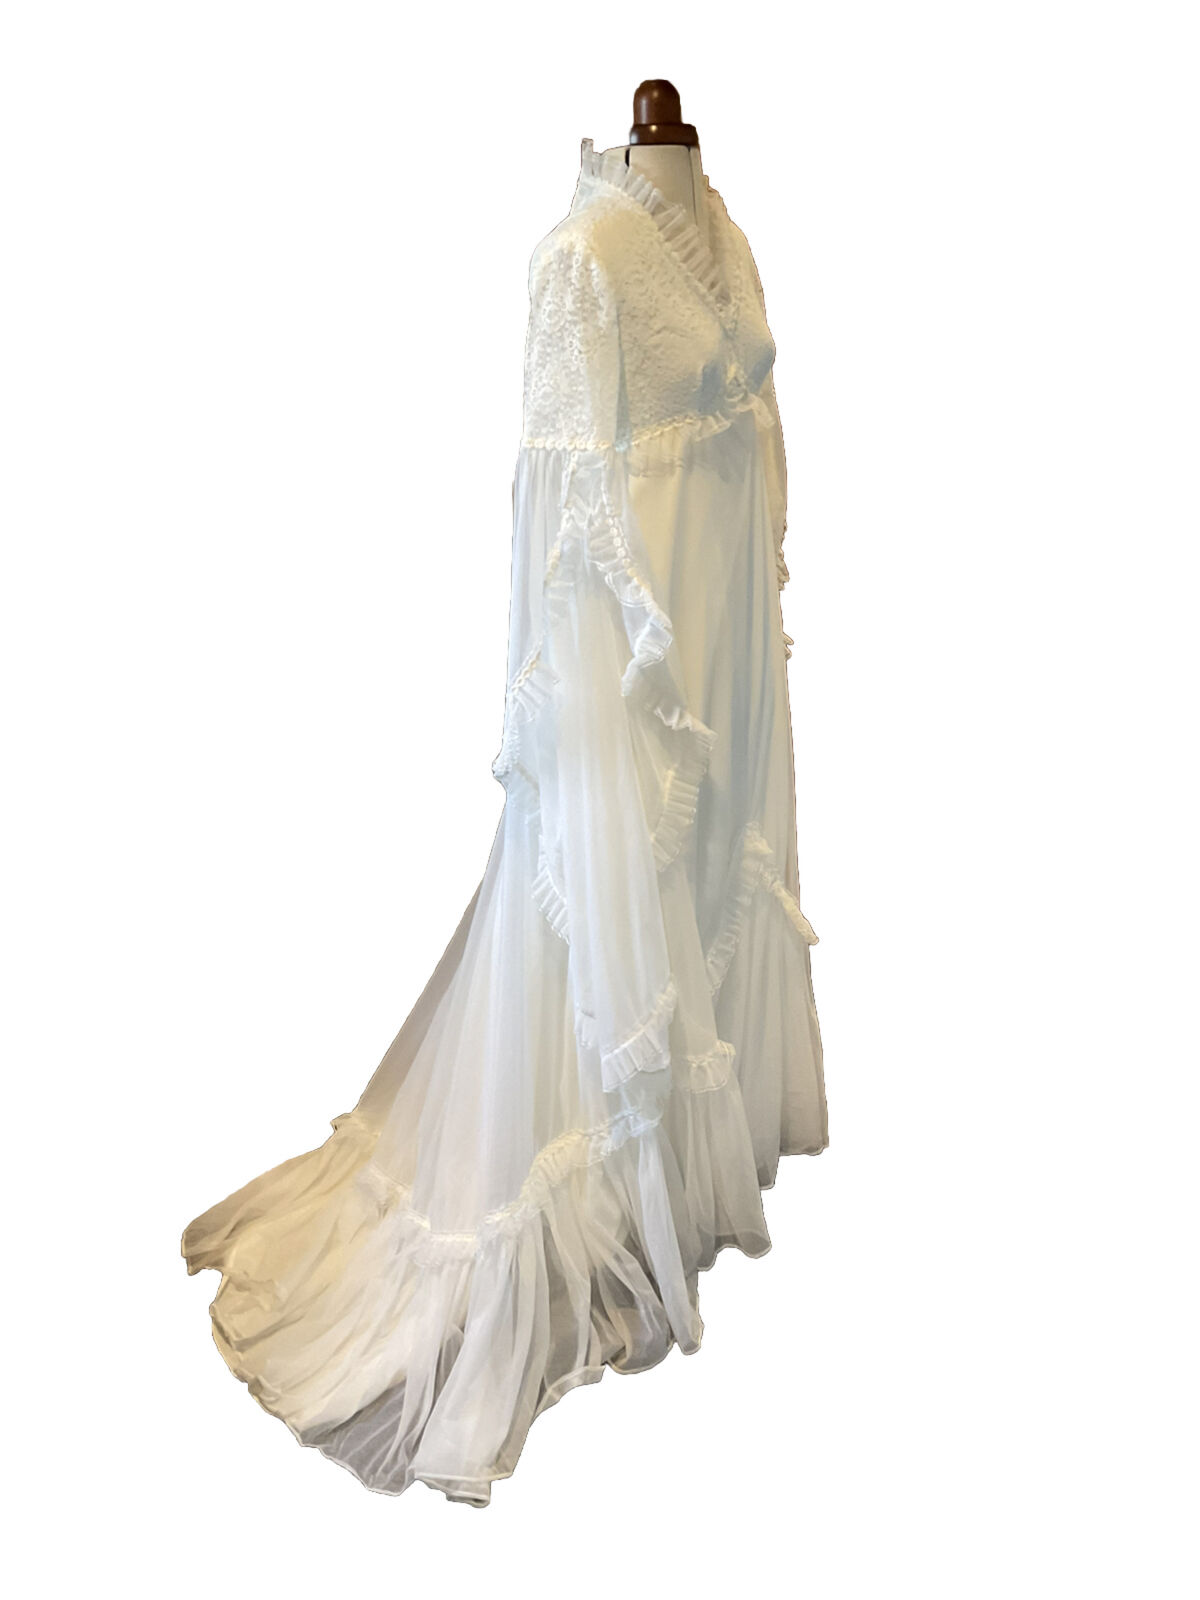 VINTAGE 1970’s MEDIEVAL STYLE WHITE LACE & CHIFFON EMPIRE LINE WEDDING ...